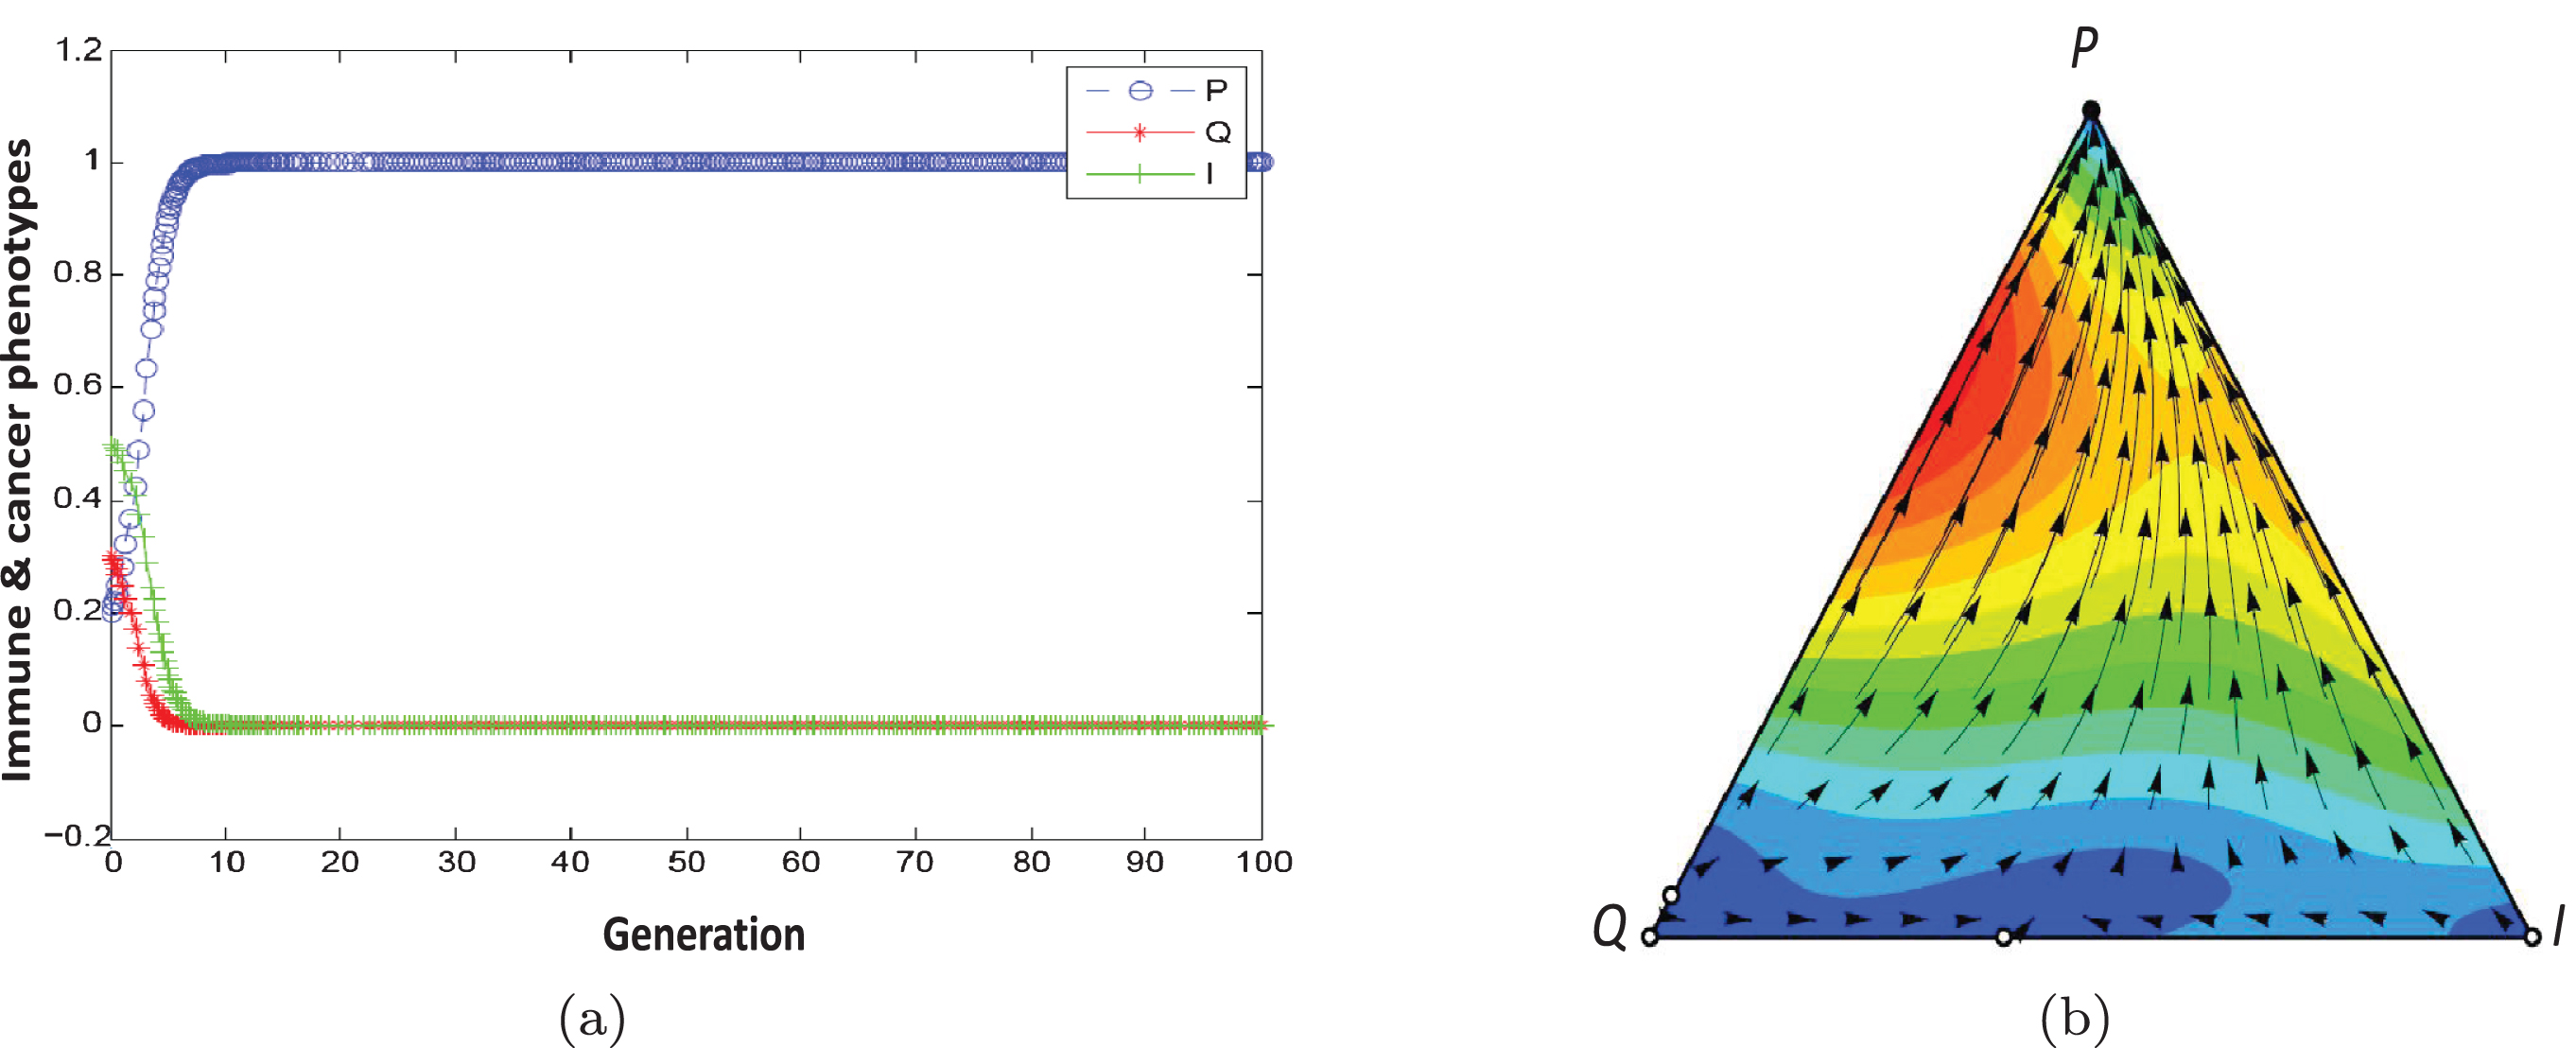 Population dynamic in the escape phase. The parameters characterising this game are a, b = 1, α = 0.9, β = 0.1, F1 = 1.5, F2 = 0.5, γ2 = 0.2, γ1 = 0, C1 = 0, C2 = 0.2 ..